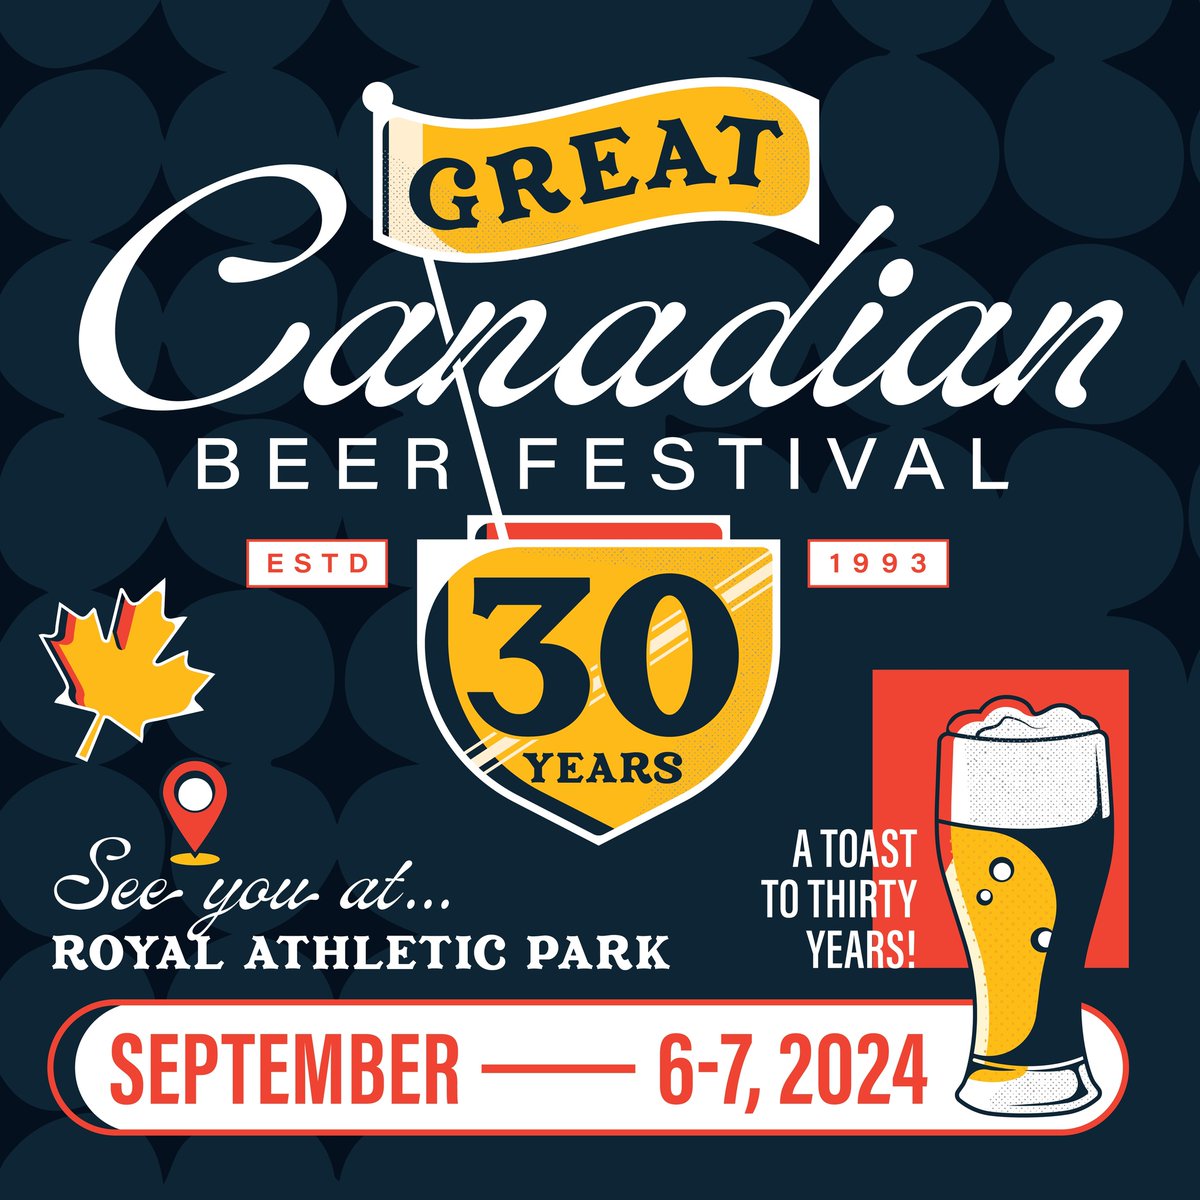 Plan your beercation to Victoria, BC for the 30th Annual Great Canadian Beer Festival that'll take place in early September. Details: brewpublic.com/beer-events/th…